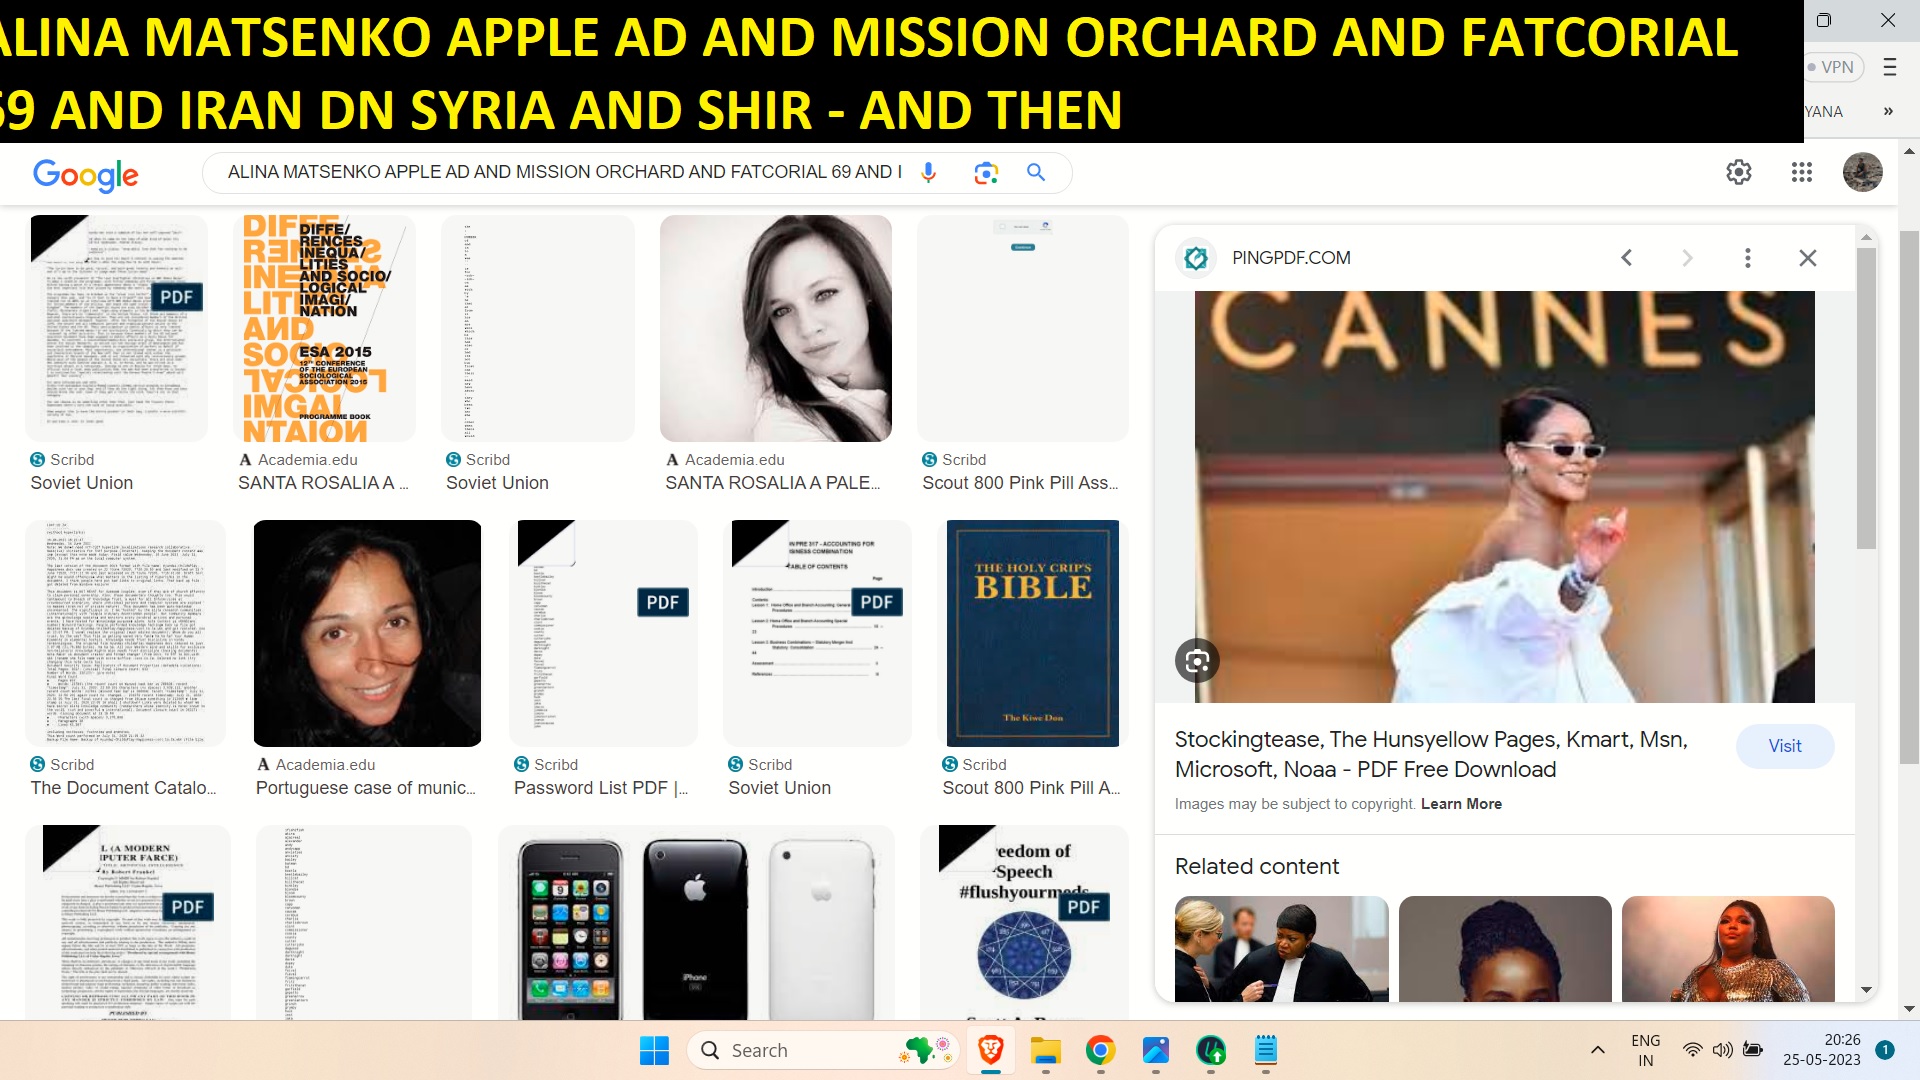 ALINA MATSENKO APPLE AD AND MISSION ORCHARD AND FATCORIAL 69 AND IRAN DN SYRIA AND SHIR - AND THEN